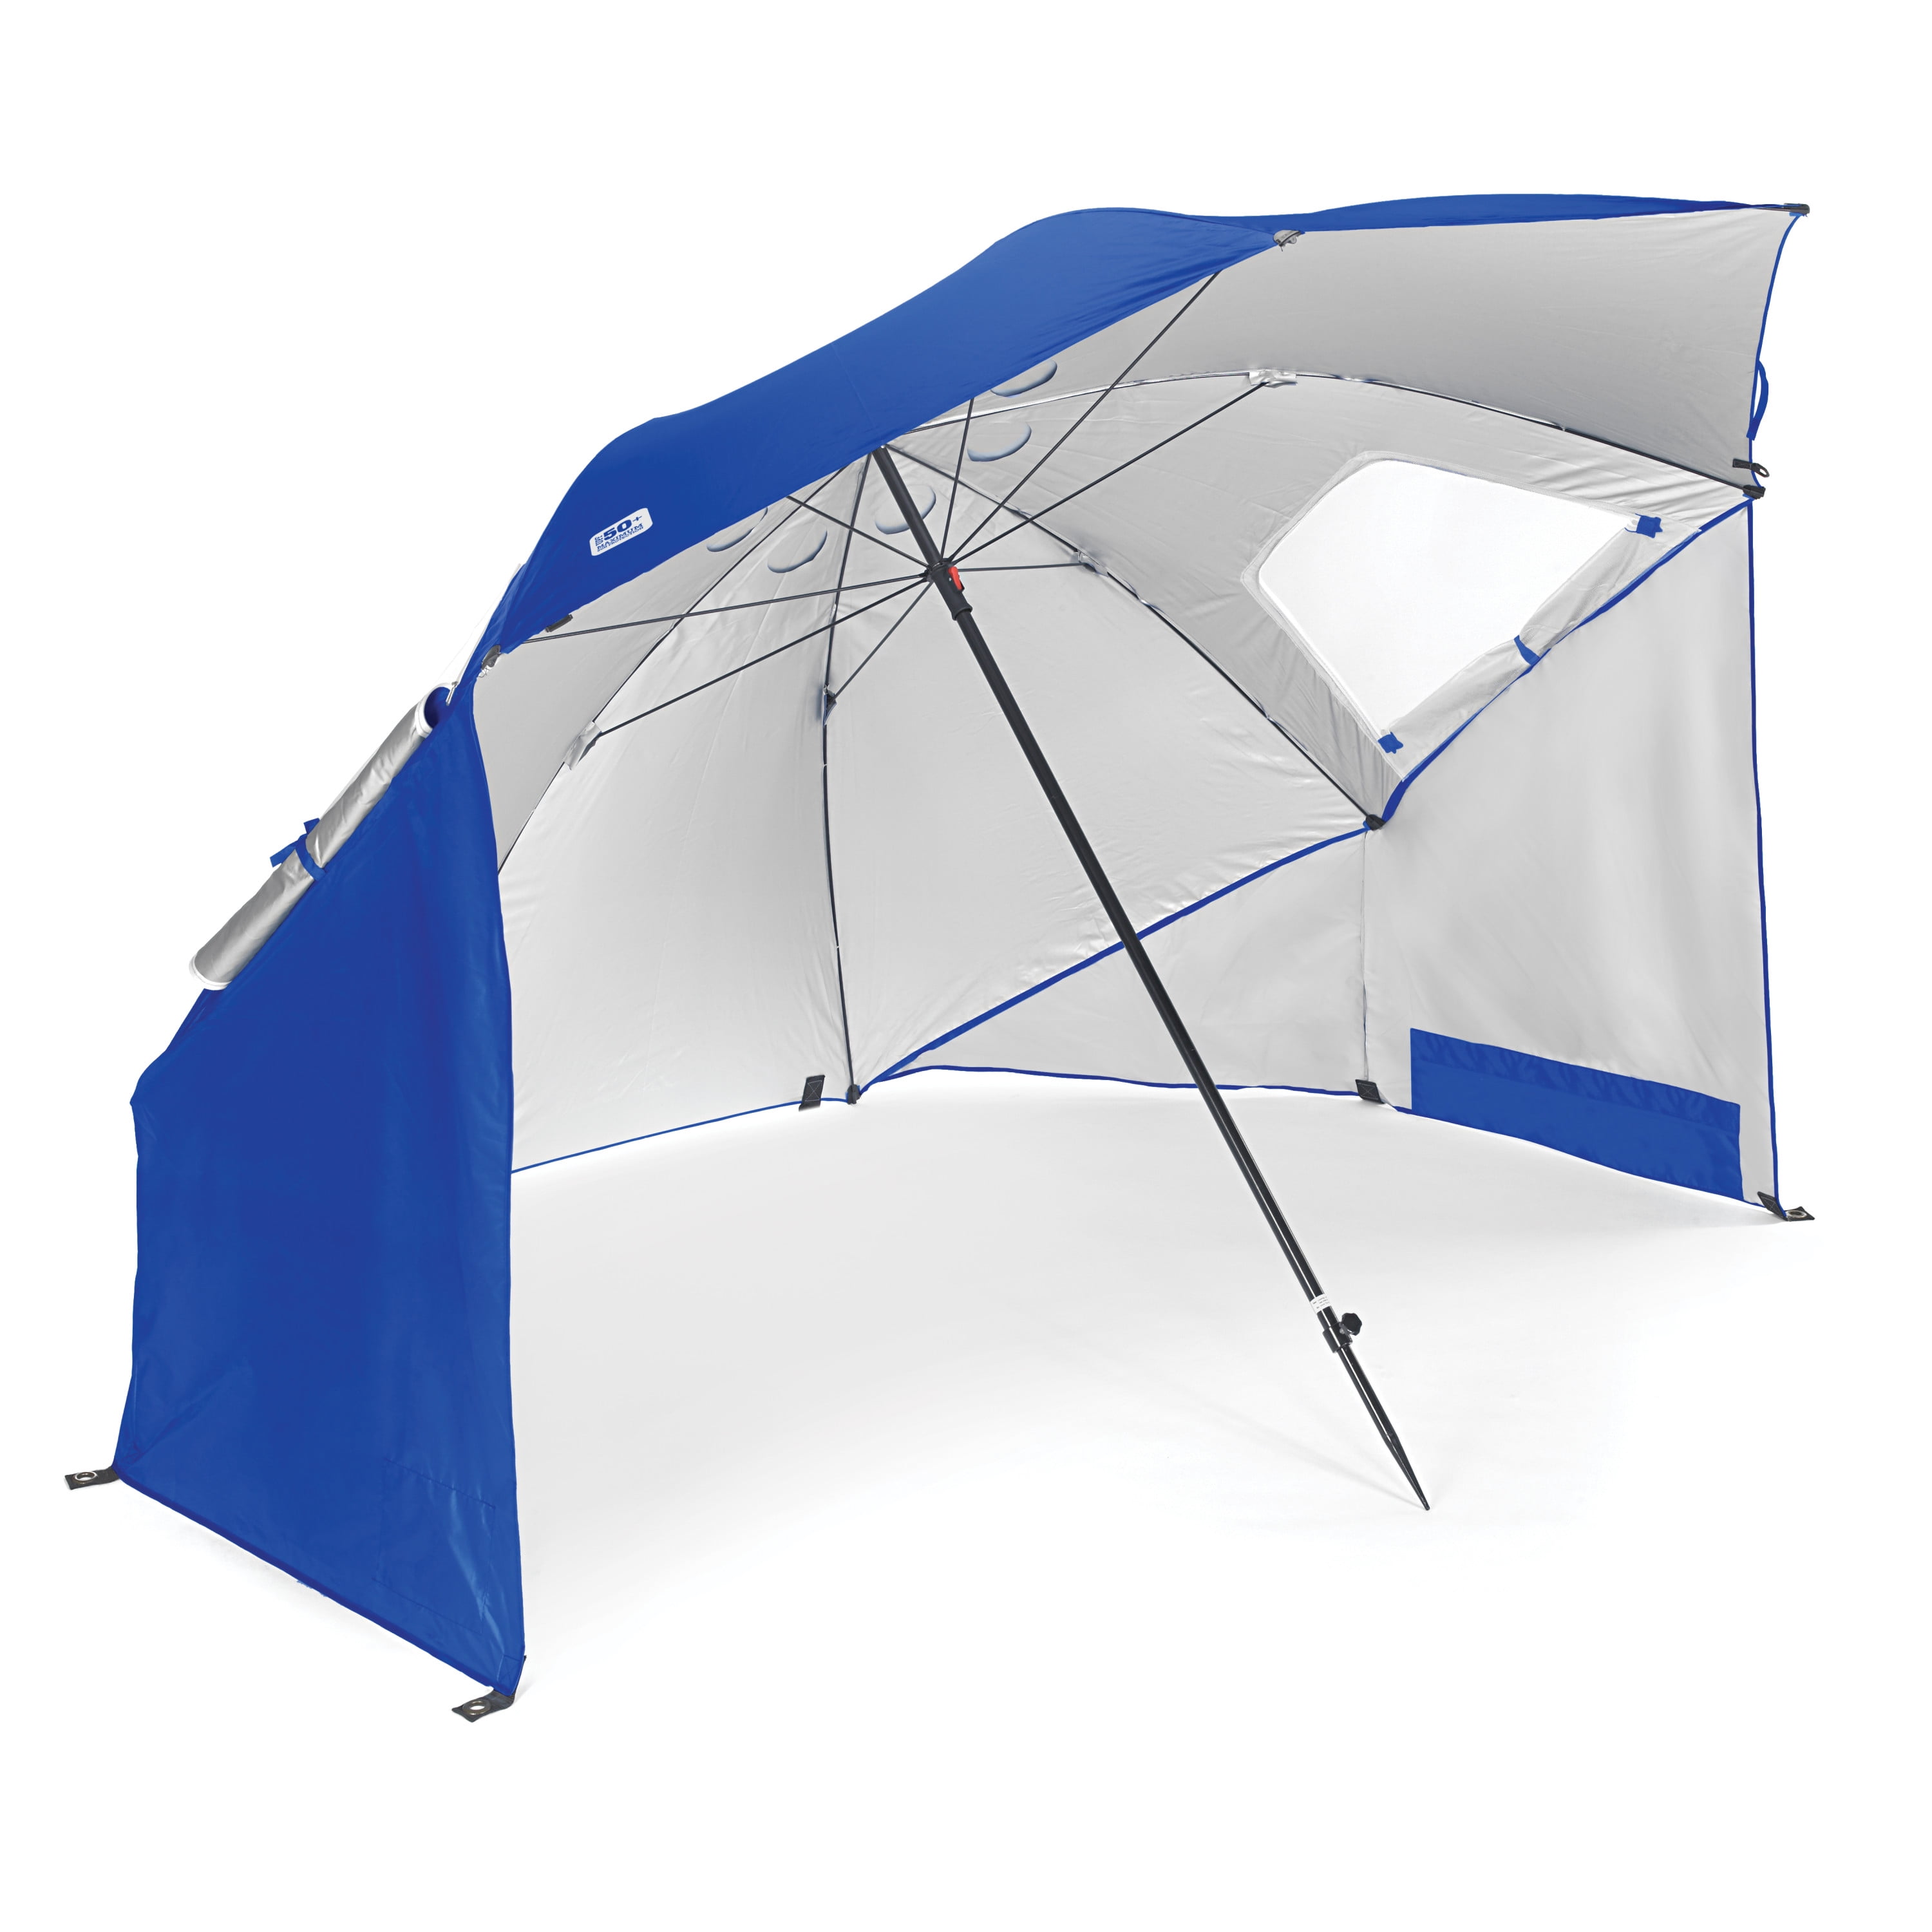 Umbrella Beach Chair Clamp on Stroller Shade Sun Block Camping Tent Canopy Blue for sale online 